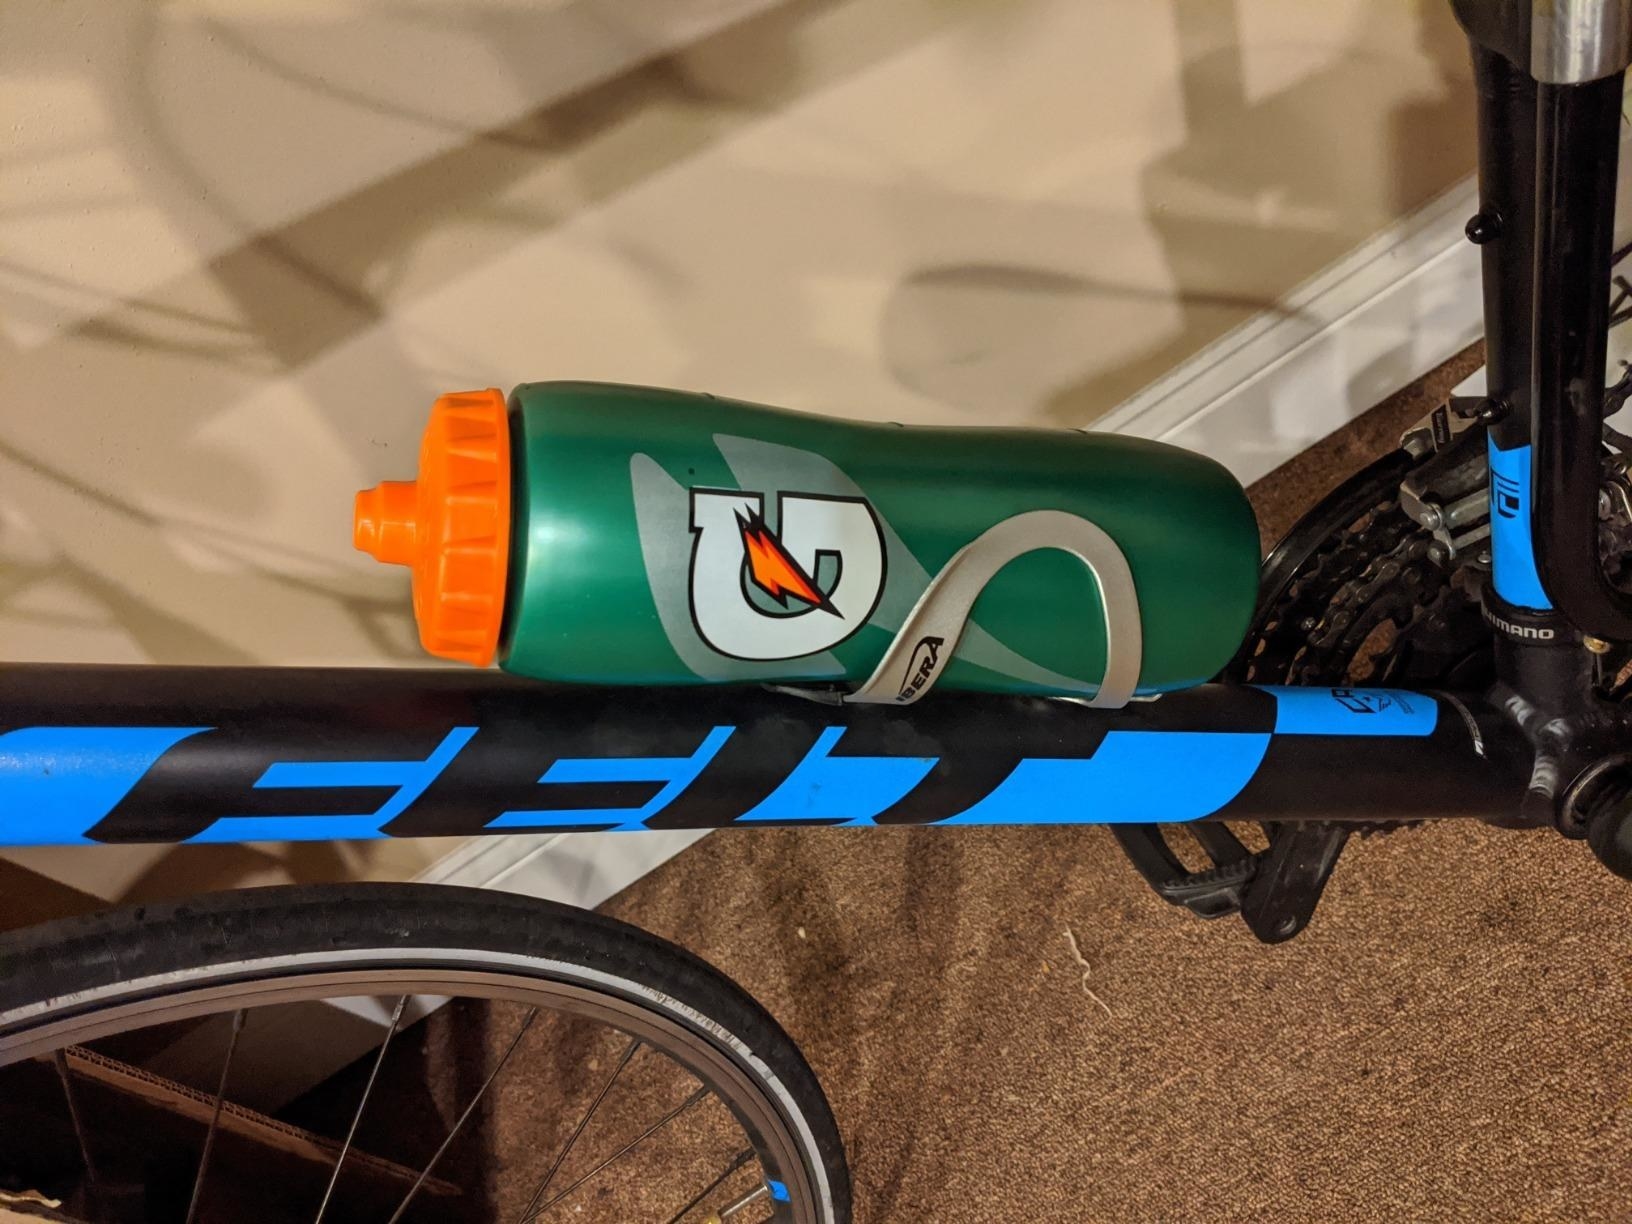 The green water bottle attached to a bike